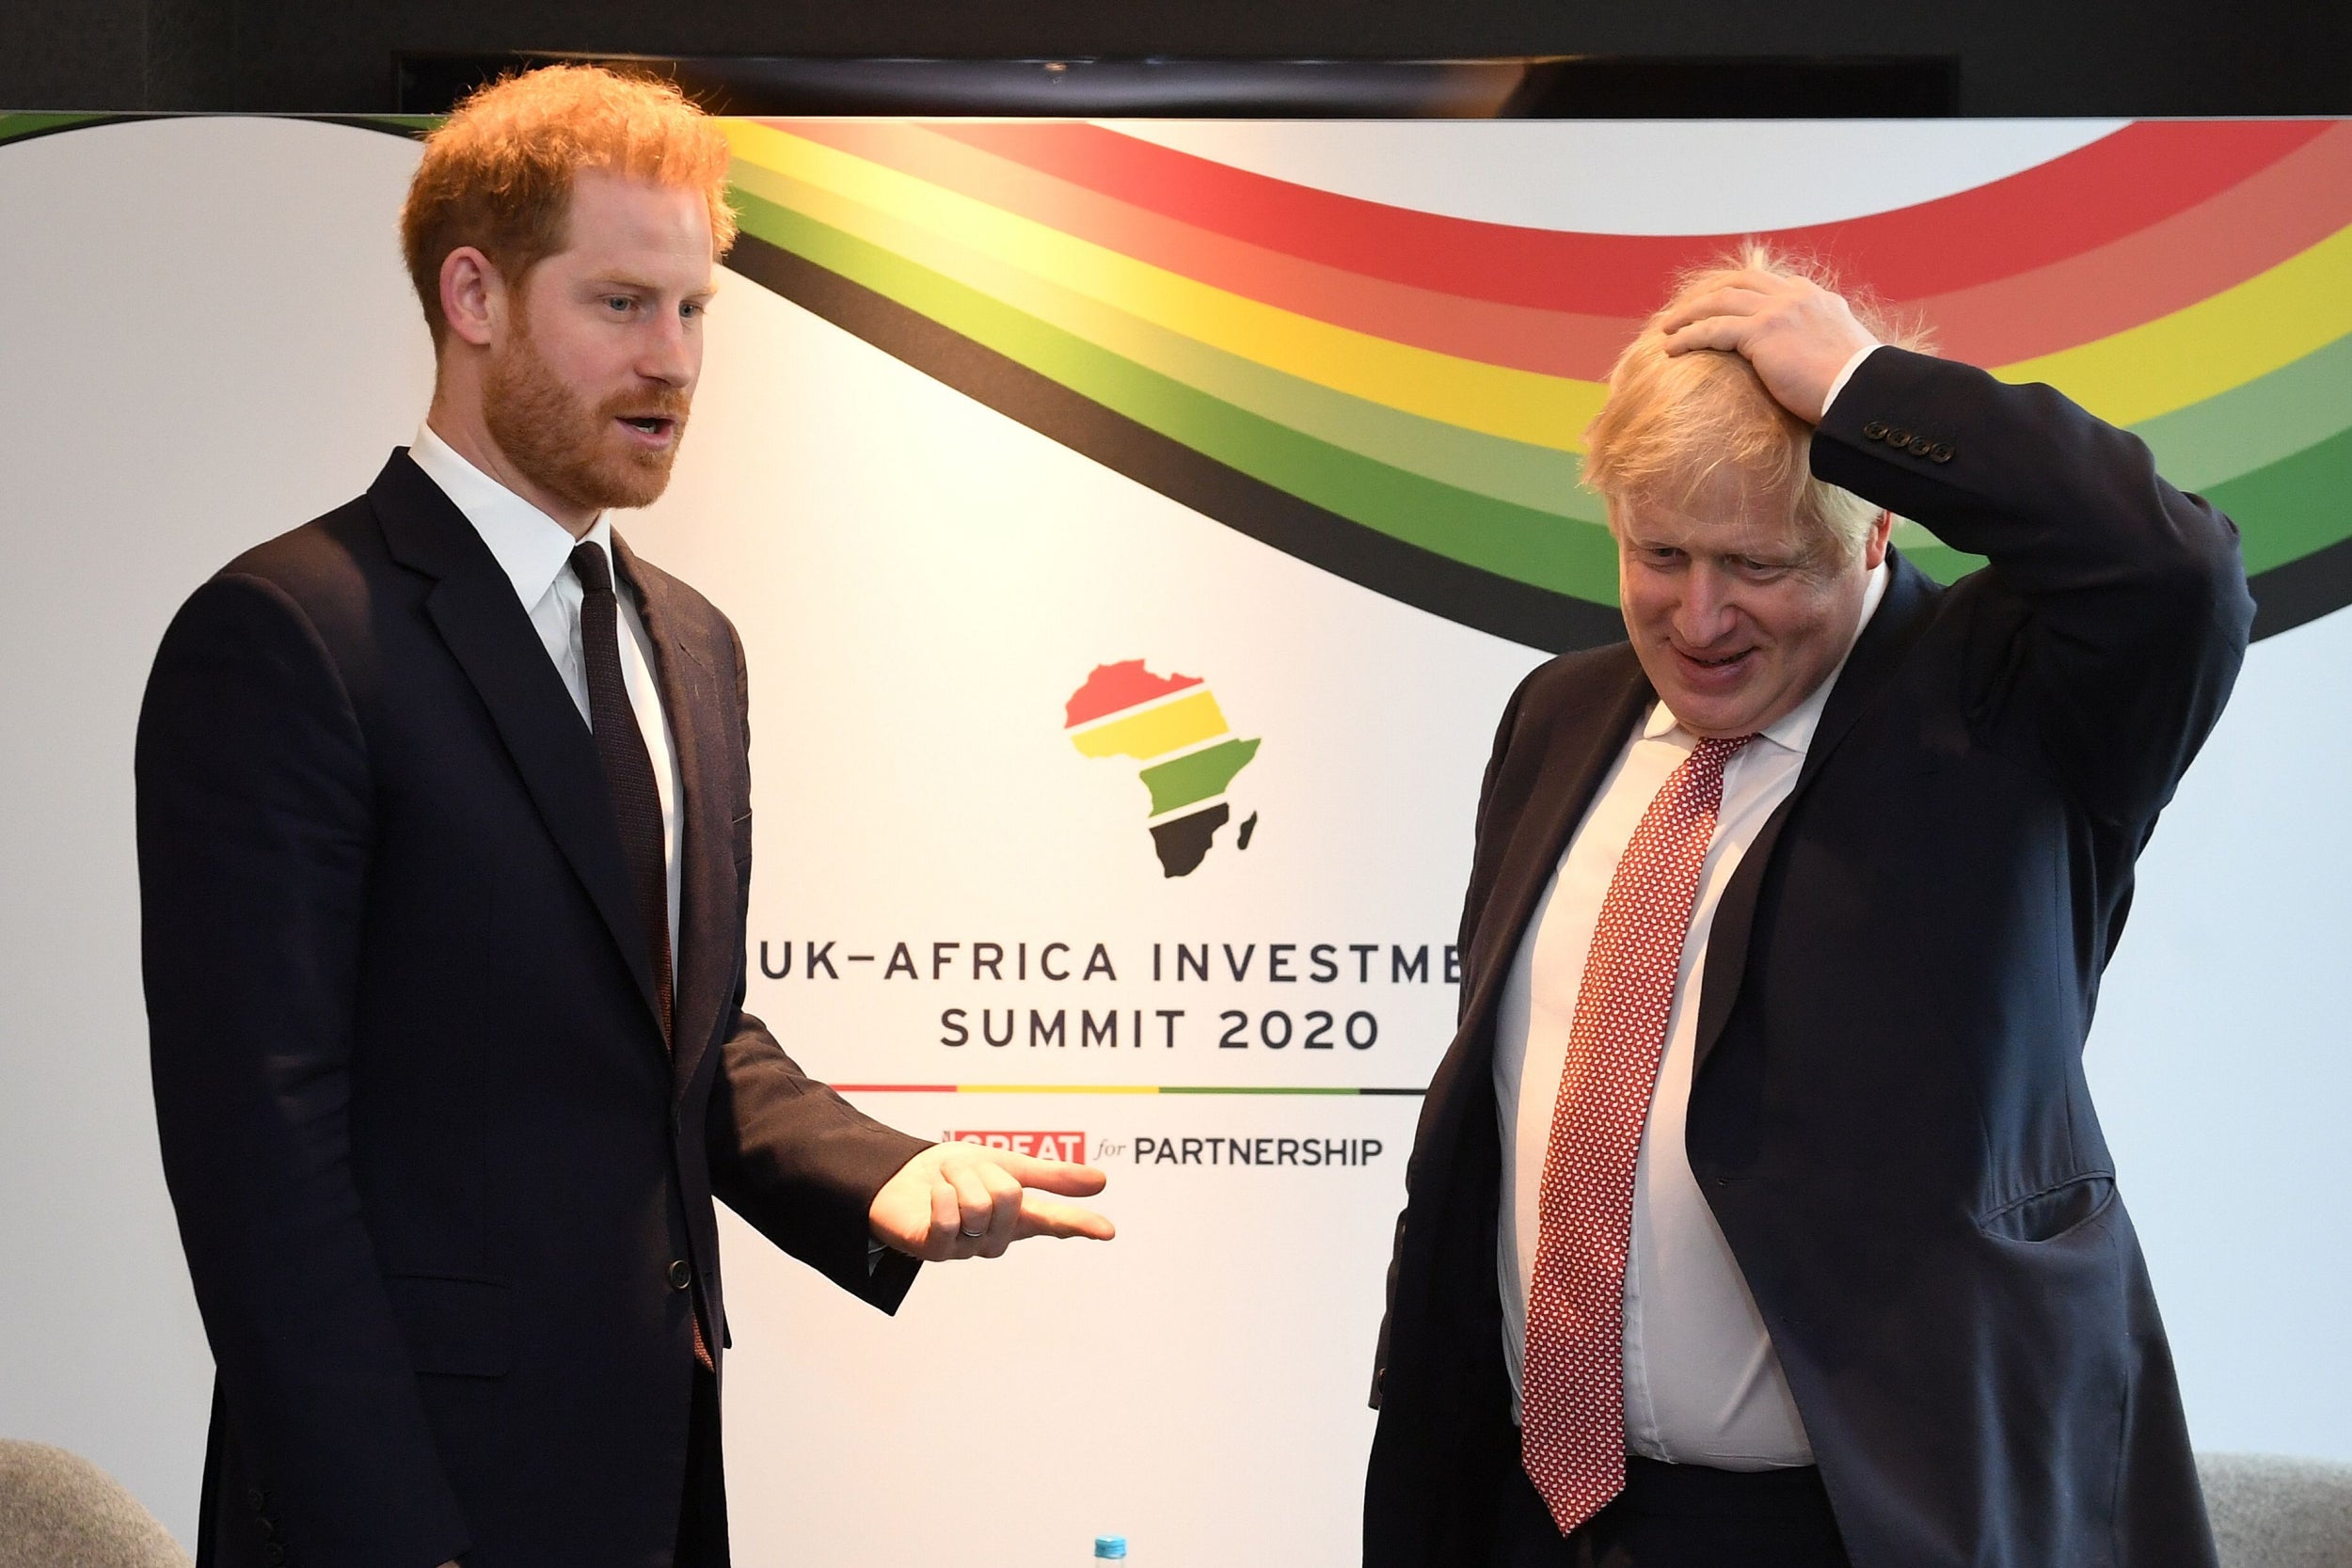 The Duke of Sussex spoke with Boris Johnson at the summit